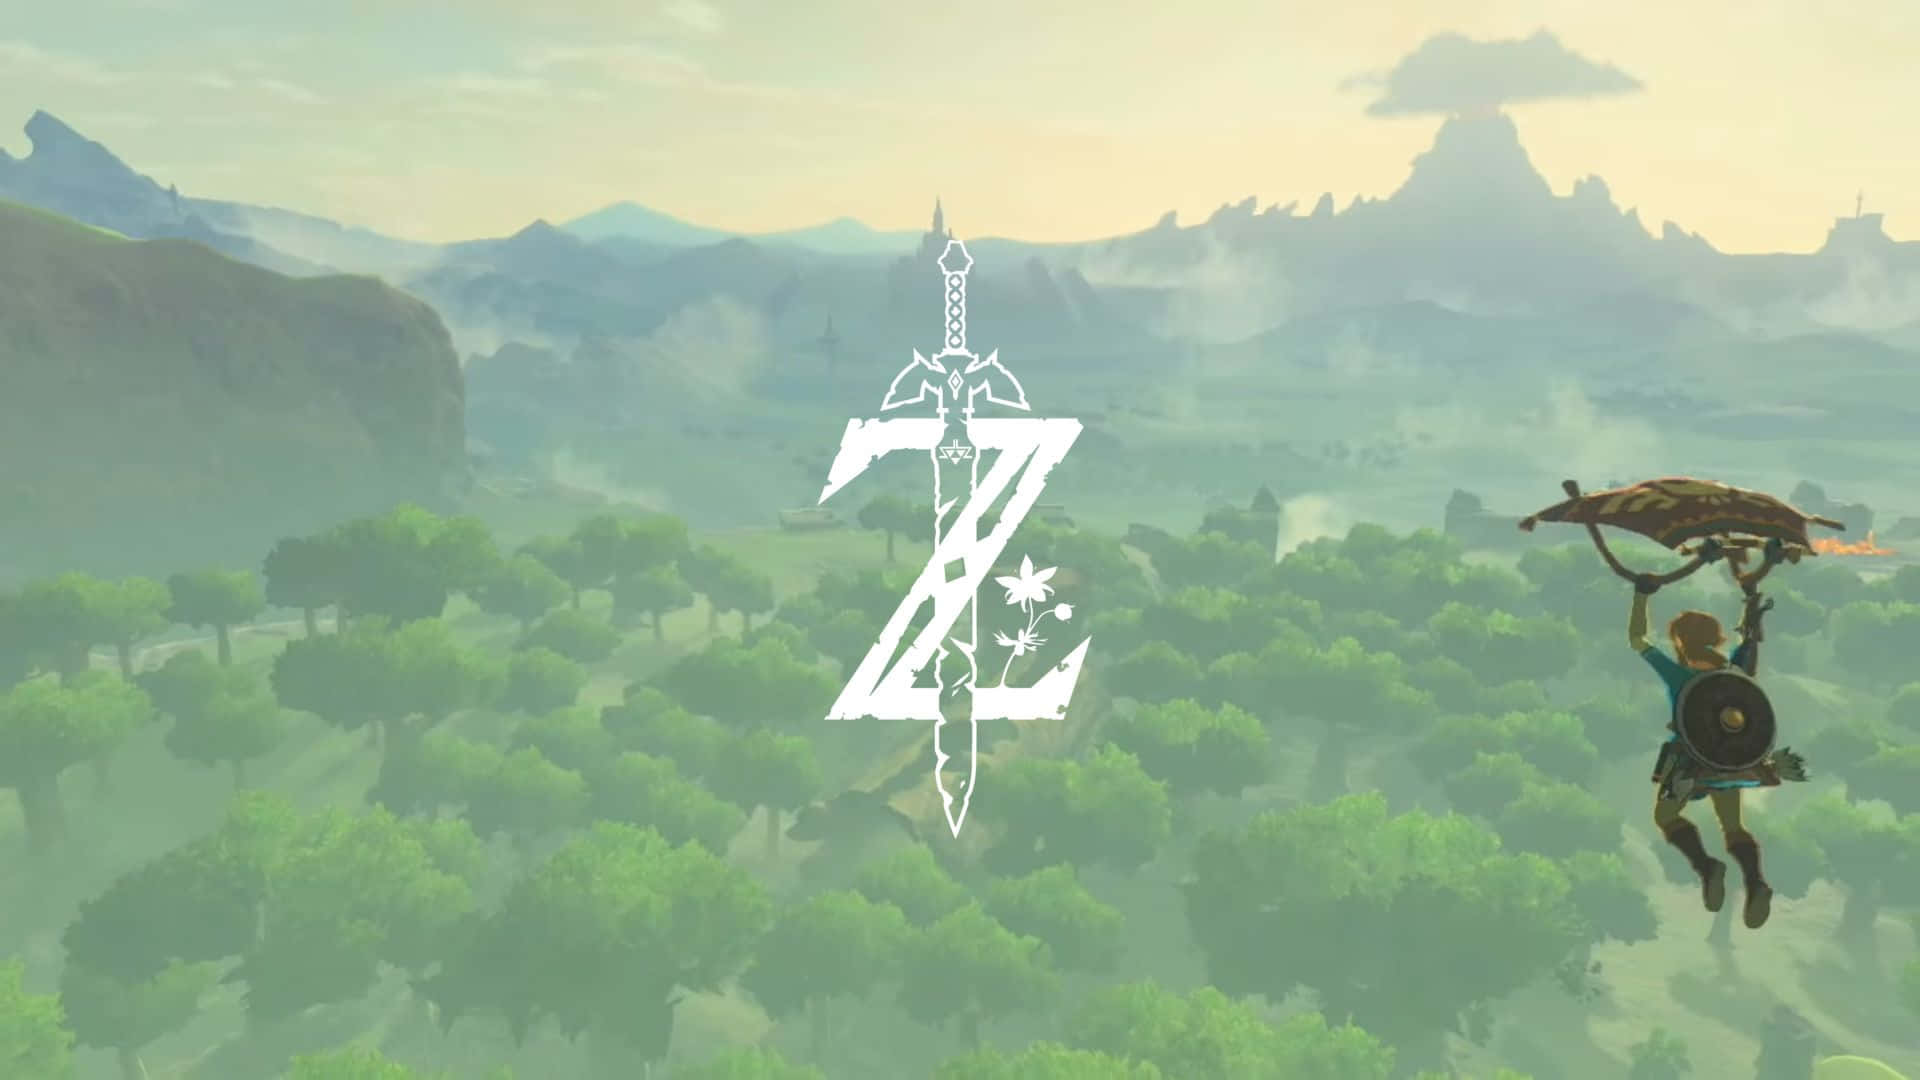 Stunning view of Hyrule landscape in The Legend of Zelda: Breath of the Wild.